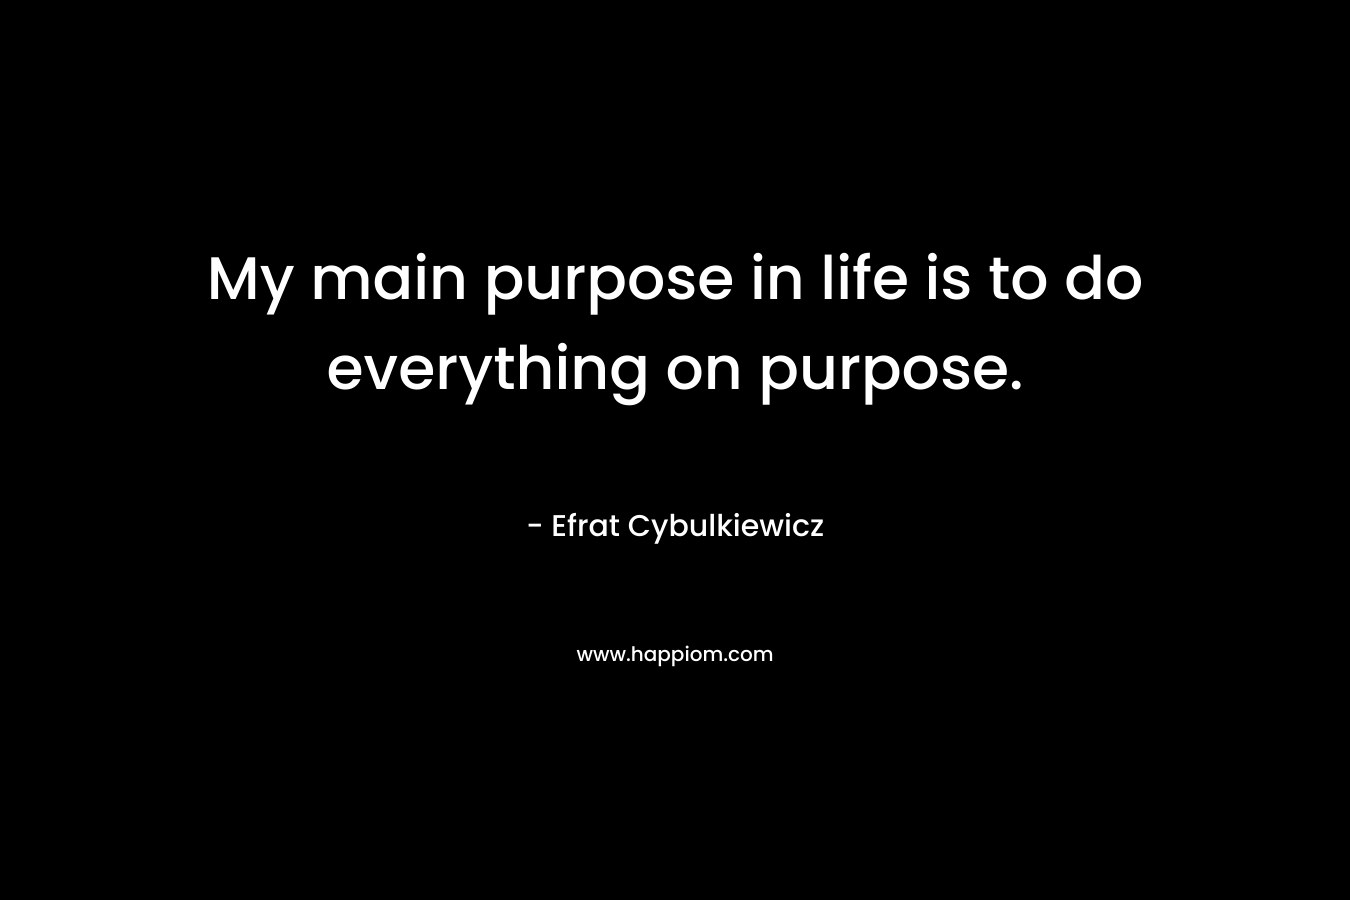 My main purpose in life is to do everything on purpose.